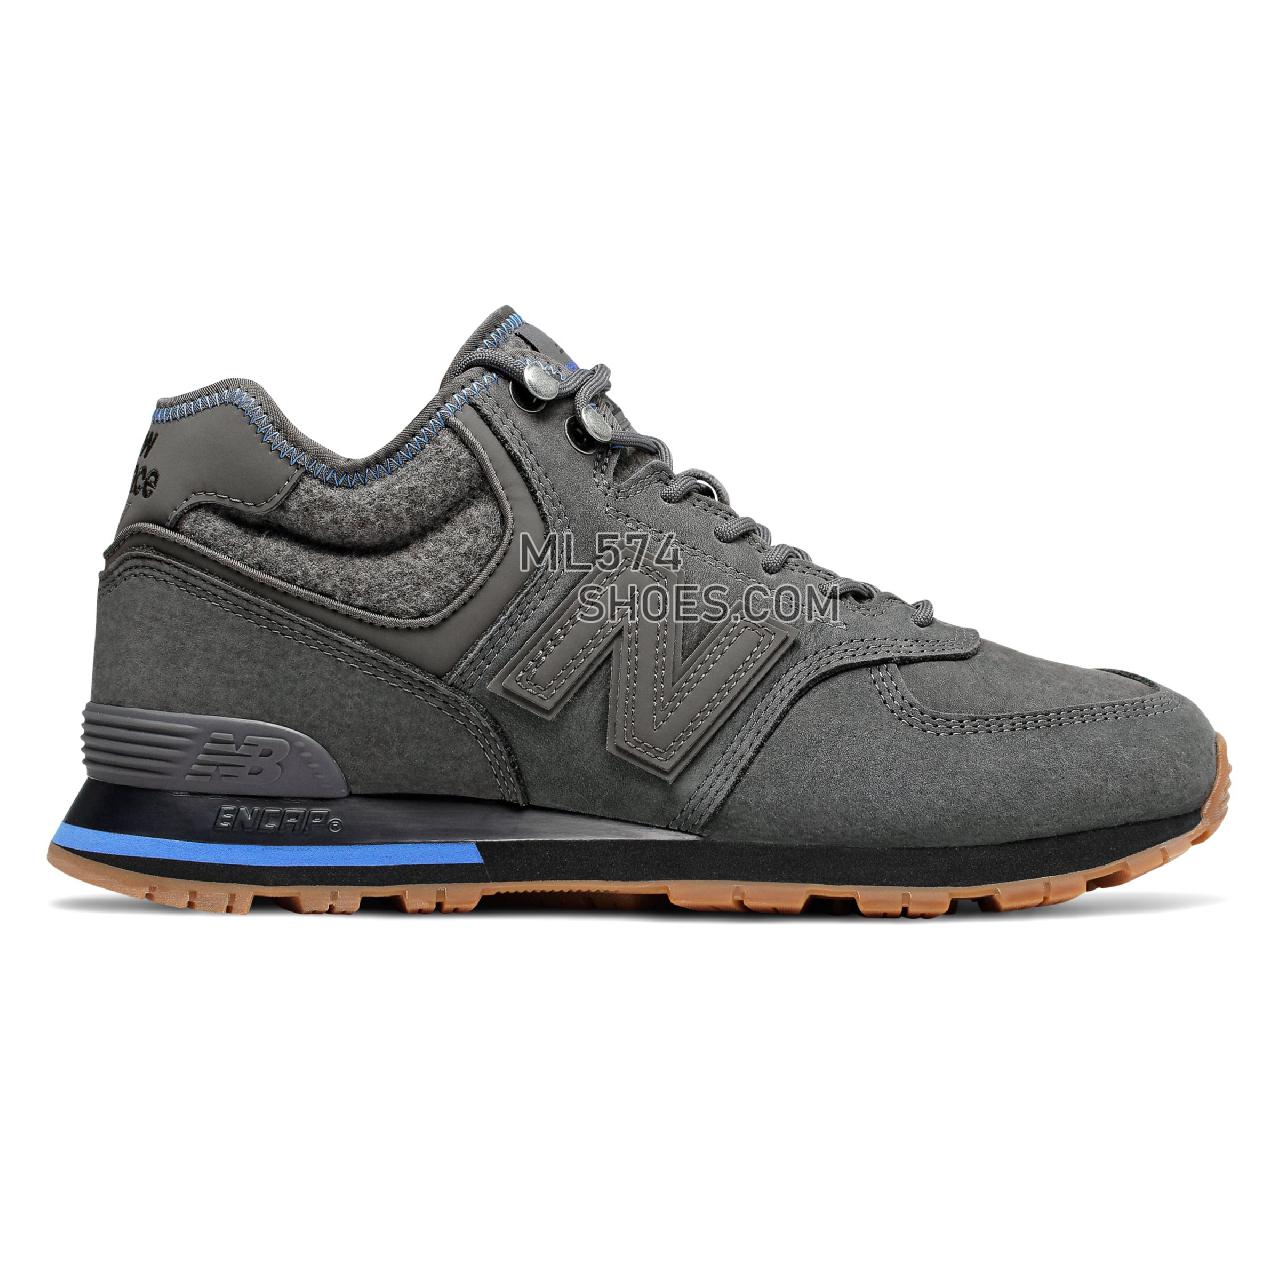 New Balance 574 Mid - Men's 574 Mid Classic MH574V1-27283-M - Magnet with Lapis Blue - MH574REA